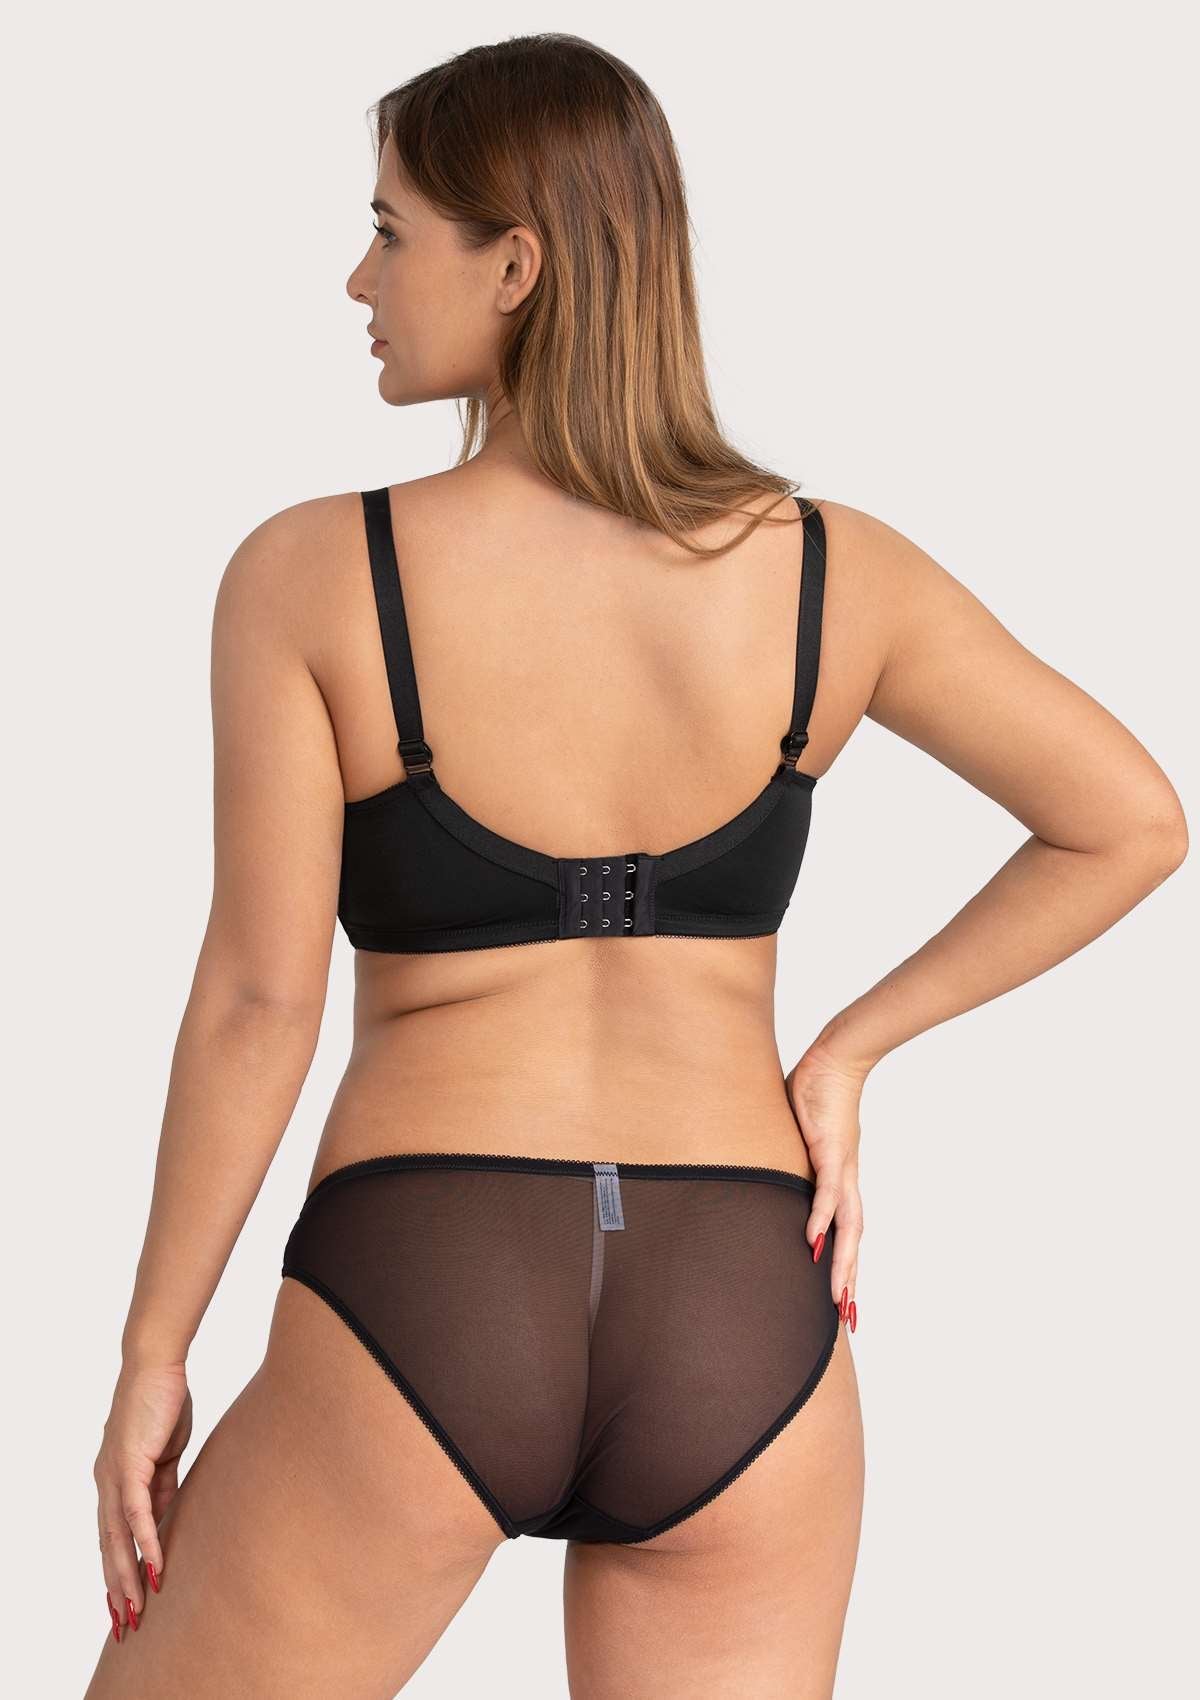 HSIA Anemone Lace Bra And Panties: Back Support Wired Bra - Black / 34 / DD/E